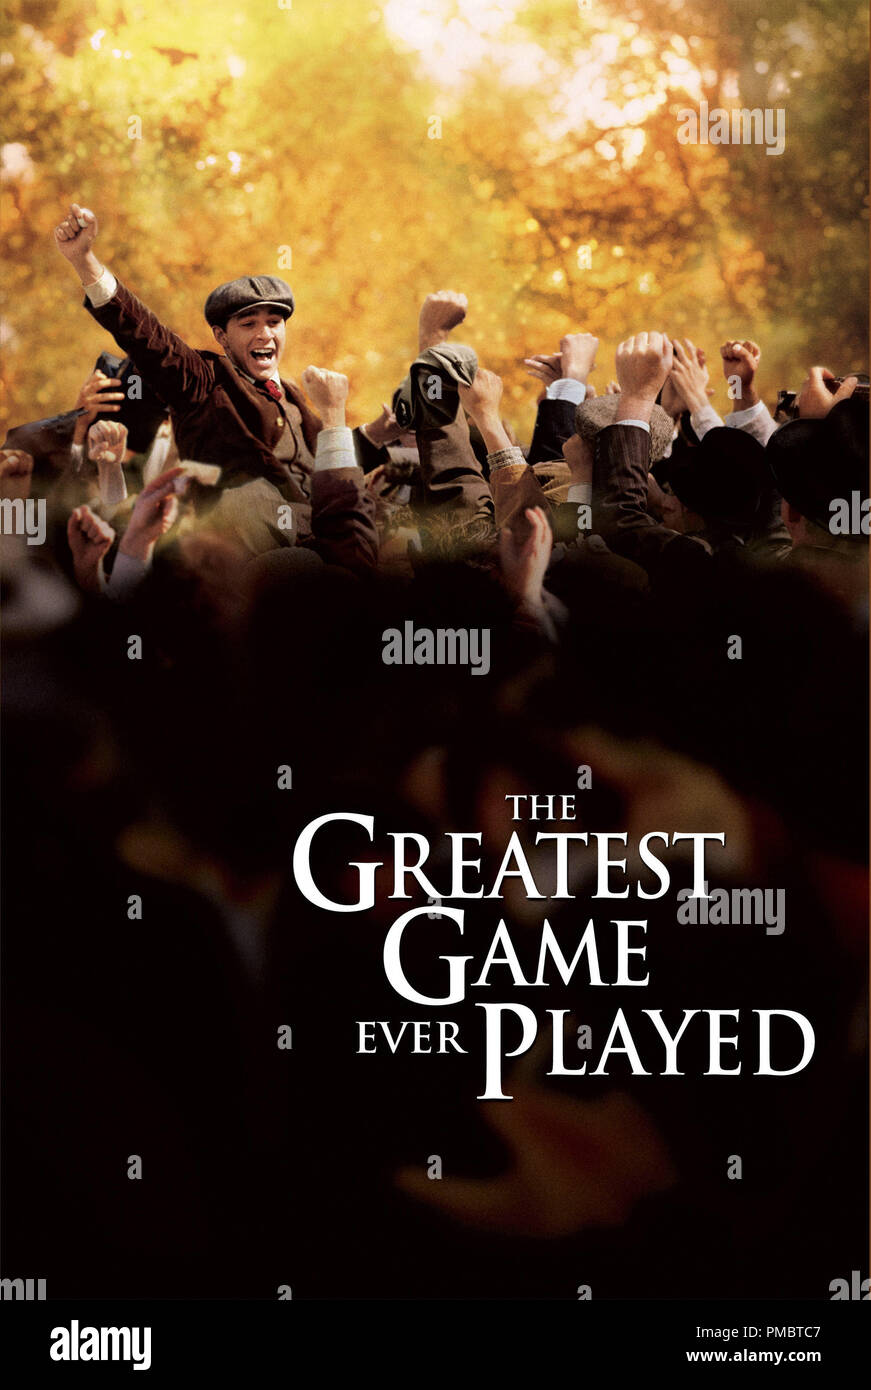 The Greatest Game Ever Played (2005) Poster Stock Photo